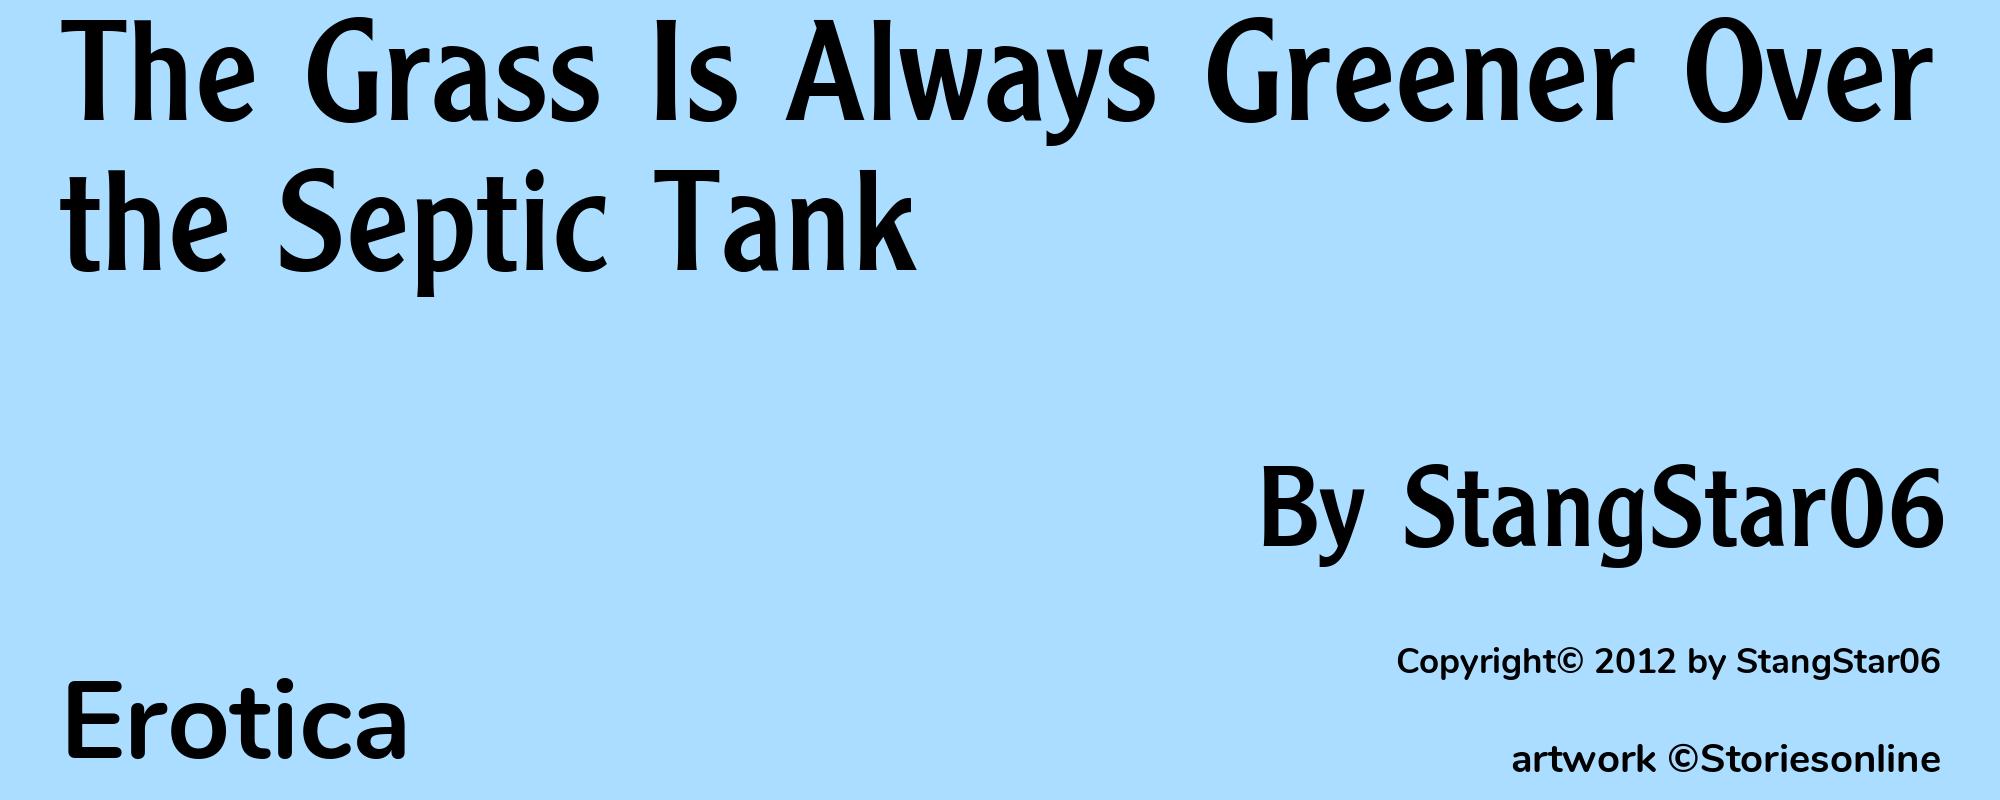 The Grass Is Always Greener Over the Septic Tank - Cover